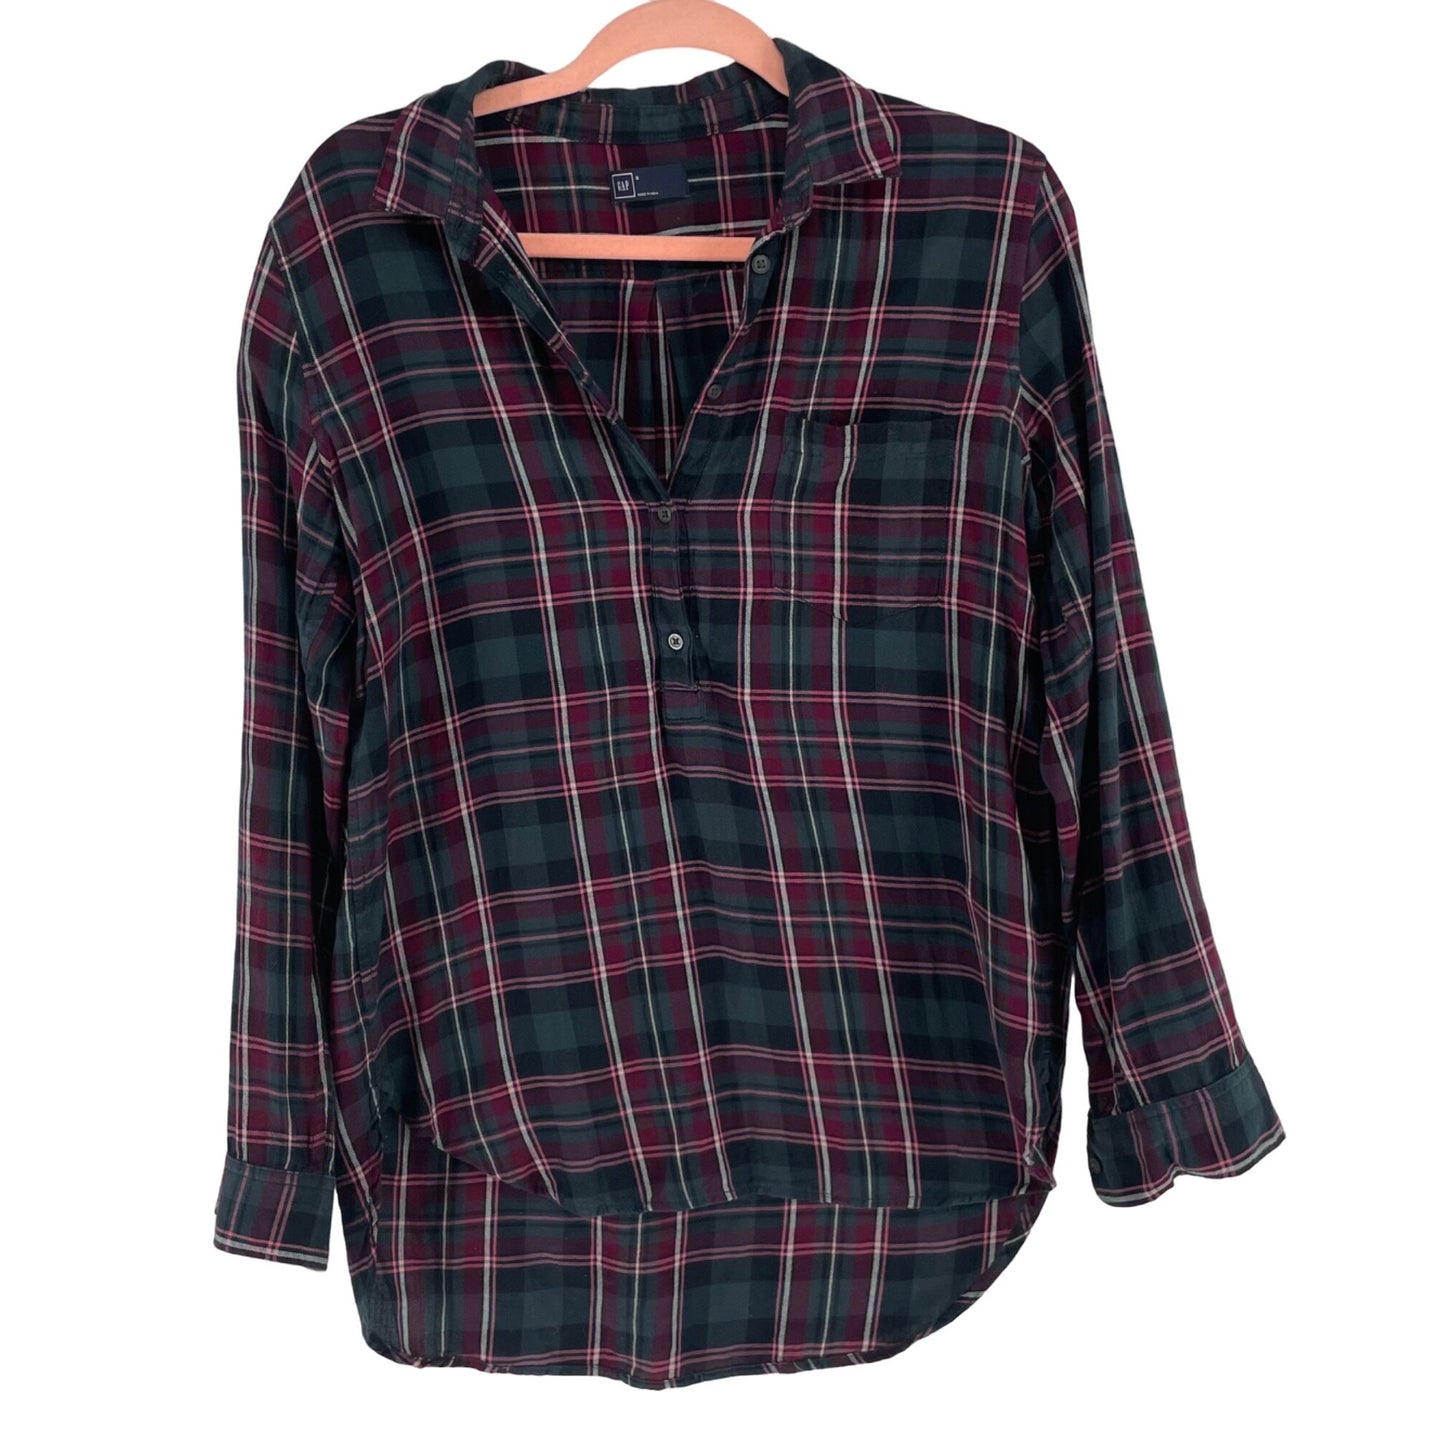 GAP Women's Size Small Forest Green & Maroon Plaid Button-Down Flannel Top